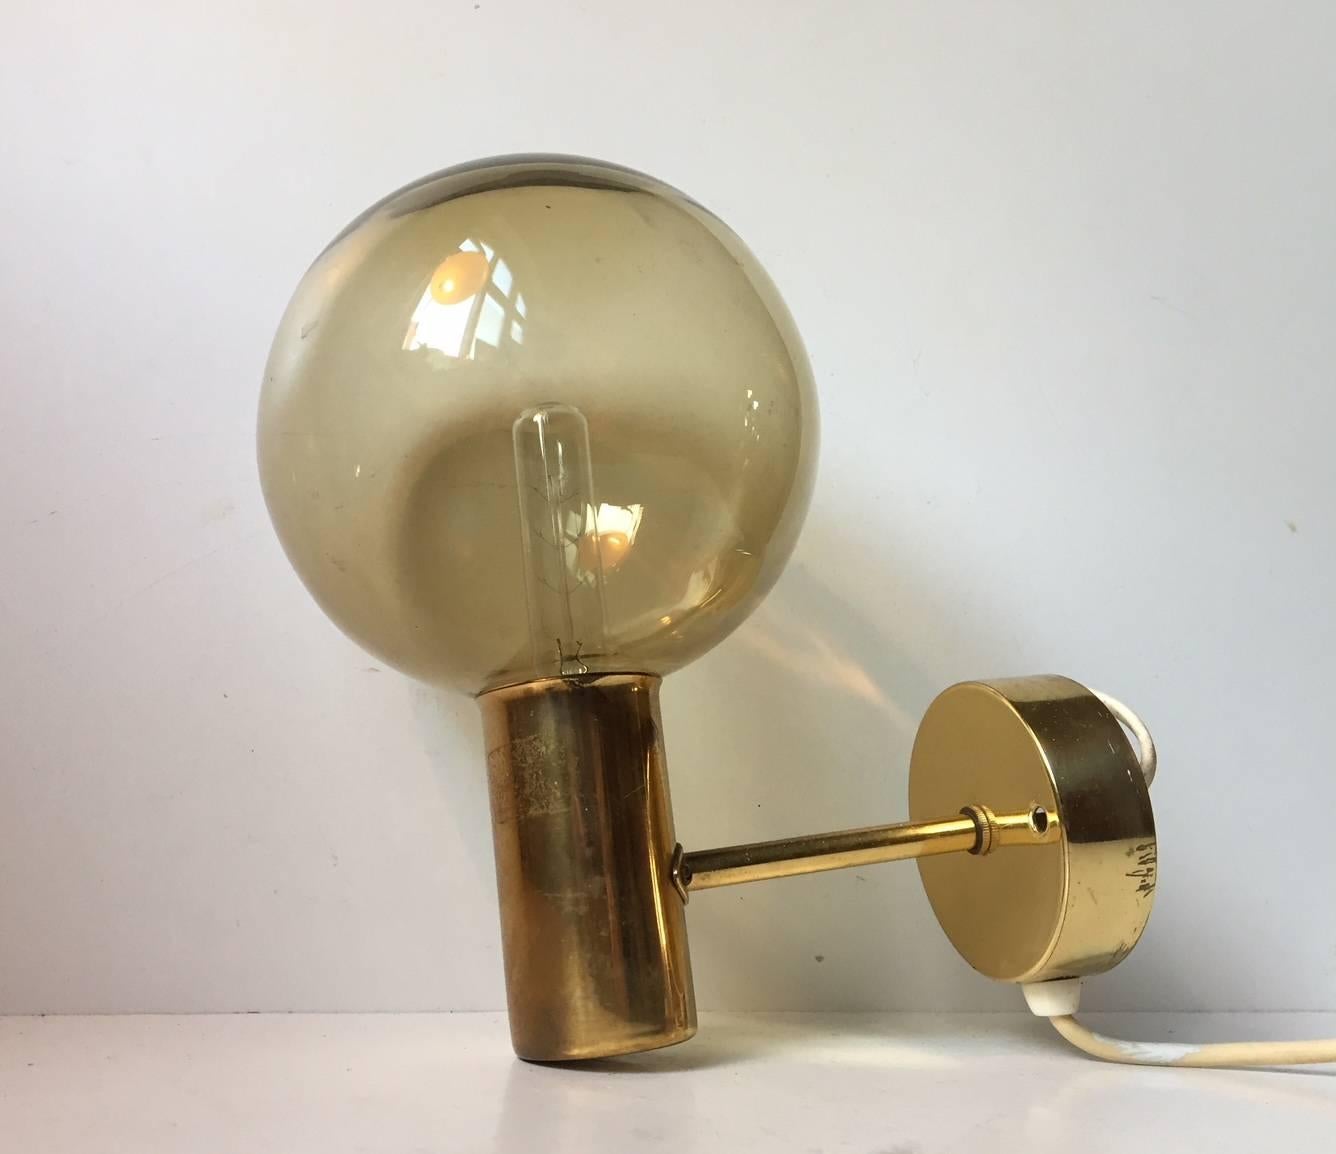 Spherical glass shaded sconce designed by Hans-Agne Jakobsson and manufactured by Markaryd AB in Sweden during the 1960s. The model is called V149. Maker/design label still present to the backside of the mount.